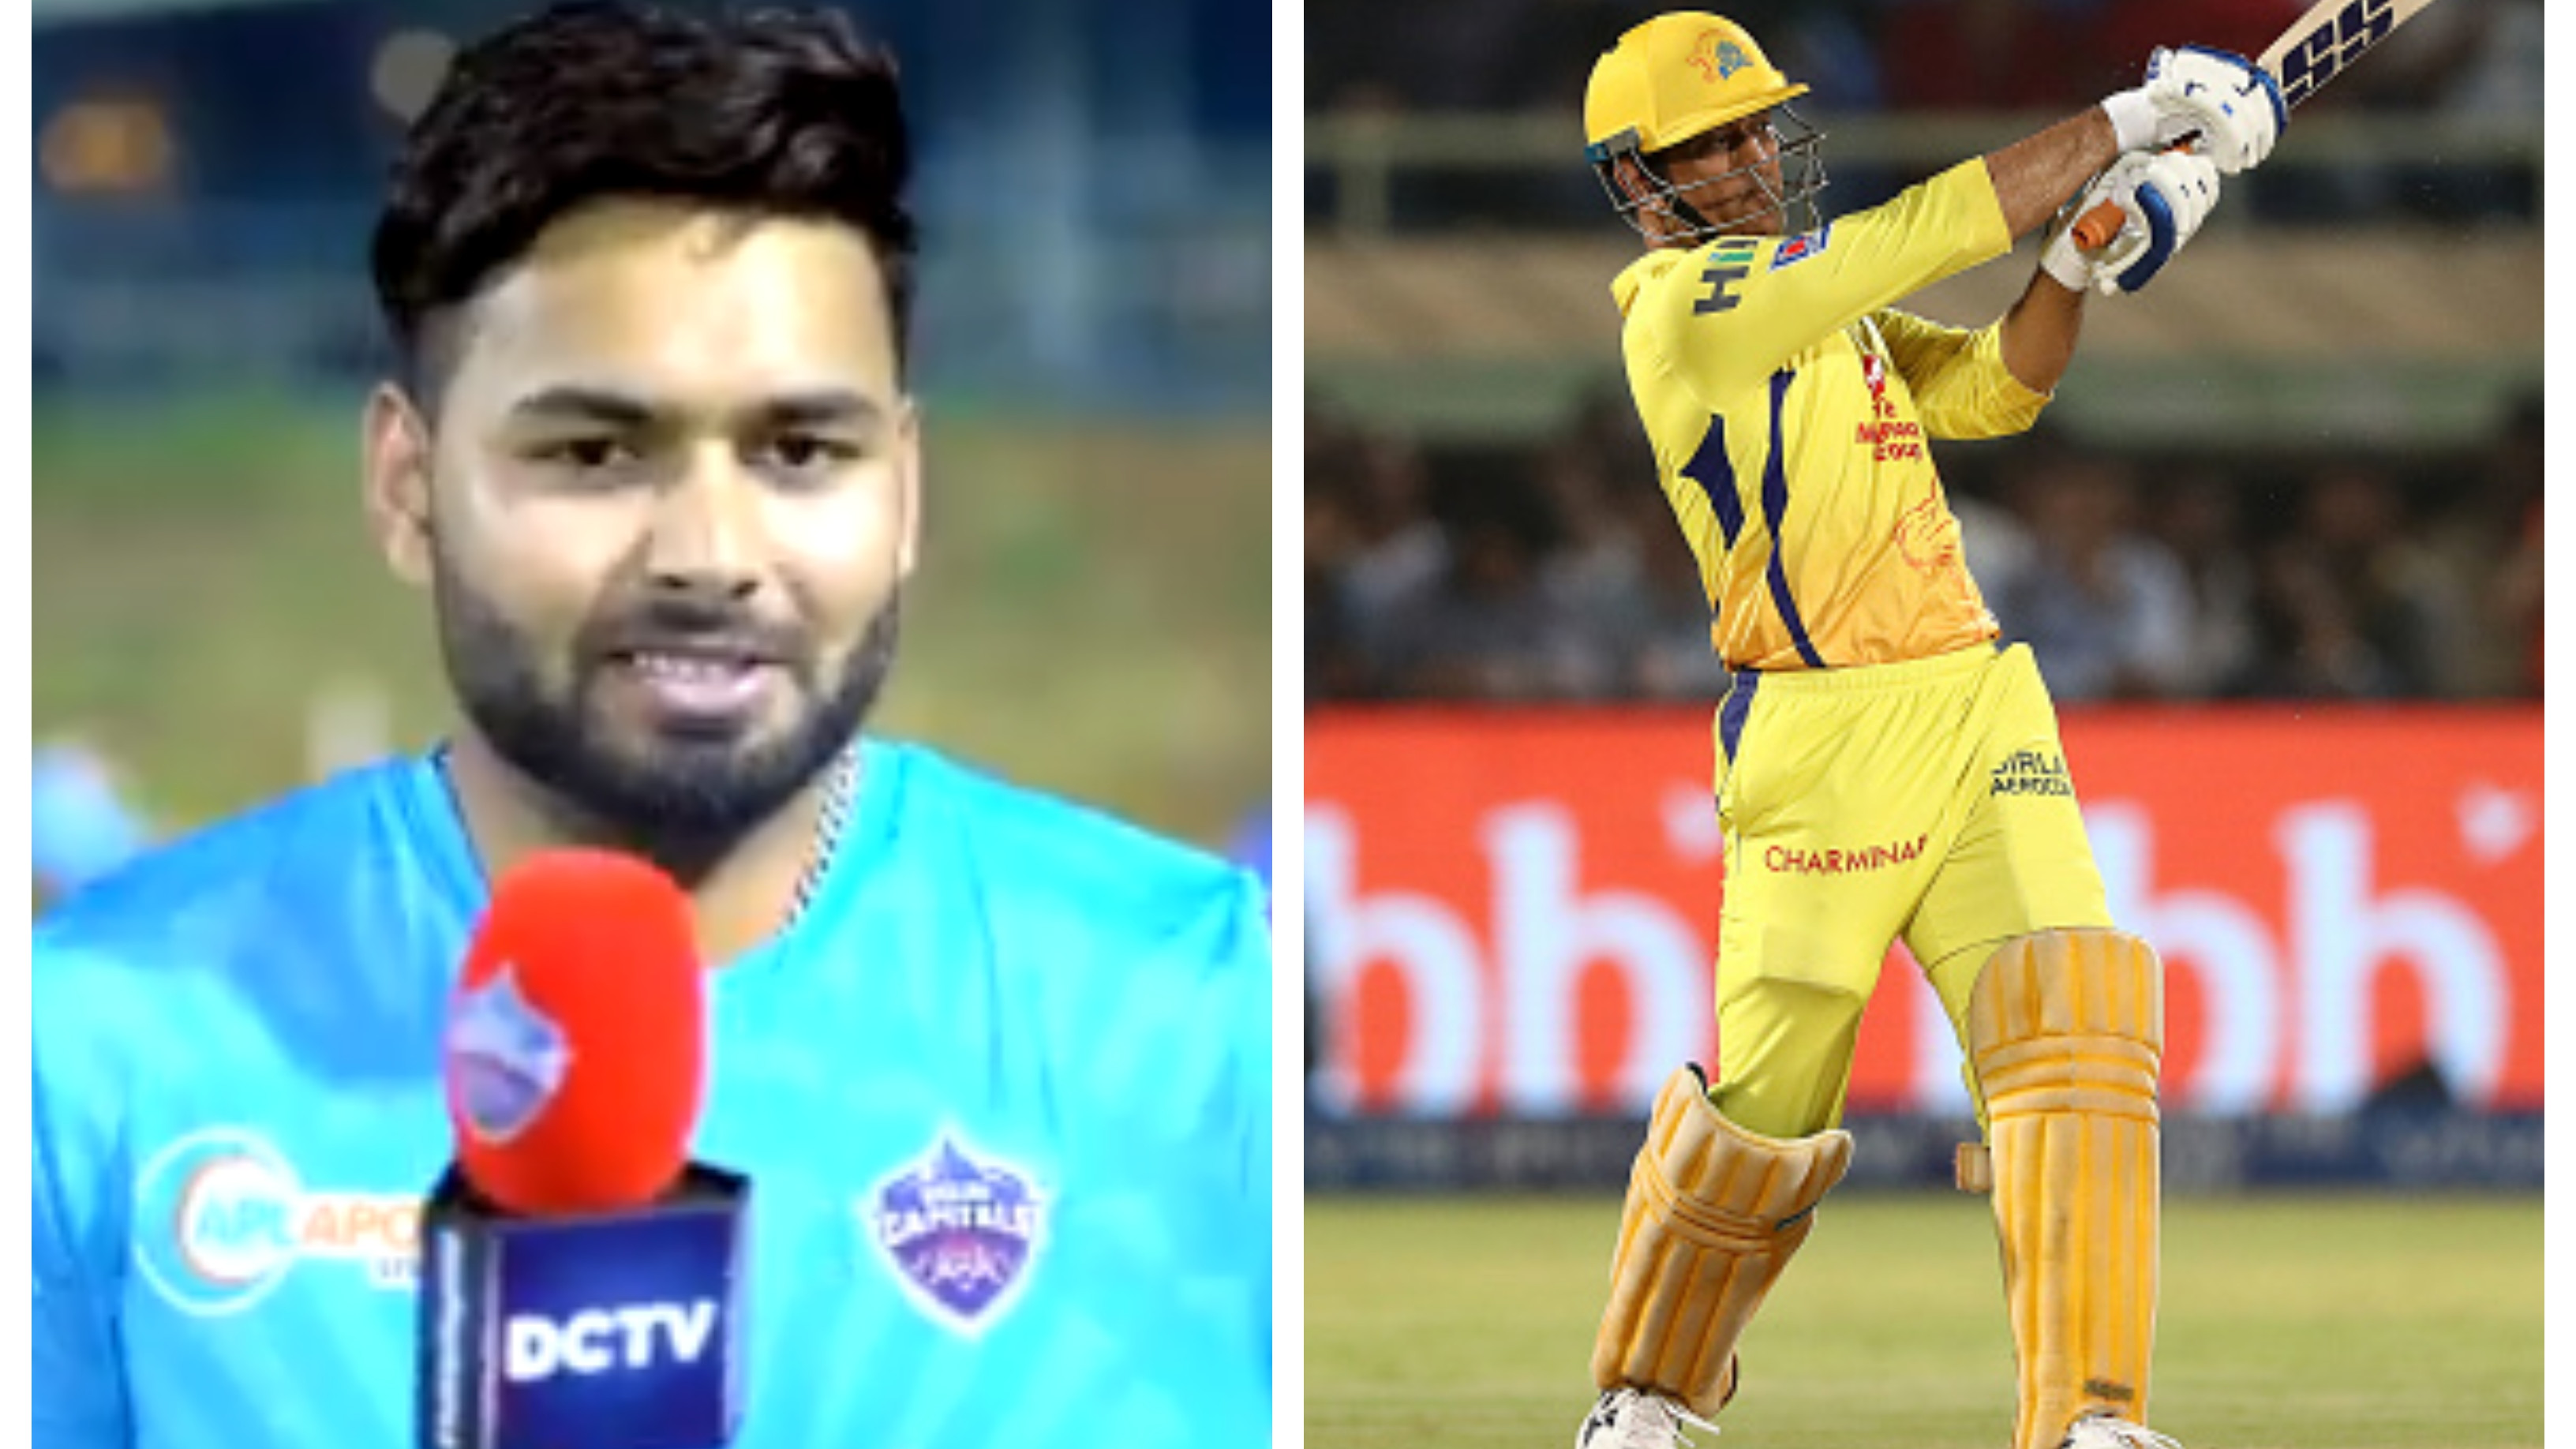 IPL 2021: Rishabh Pant hoping to apply the “learnings” from MS Dhoni to beat CSK in first game